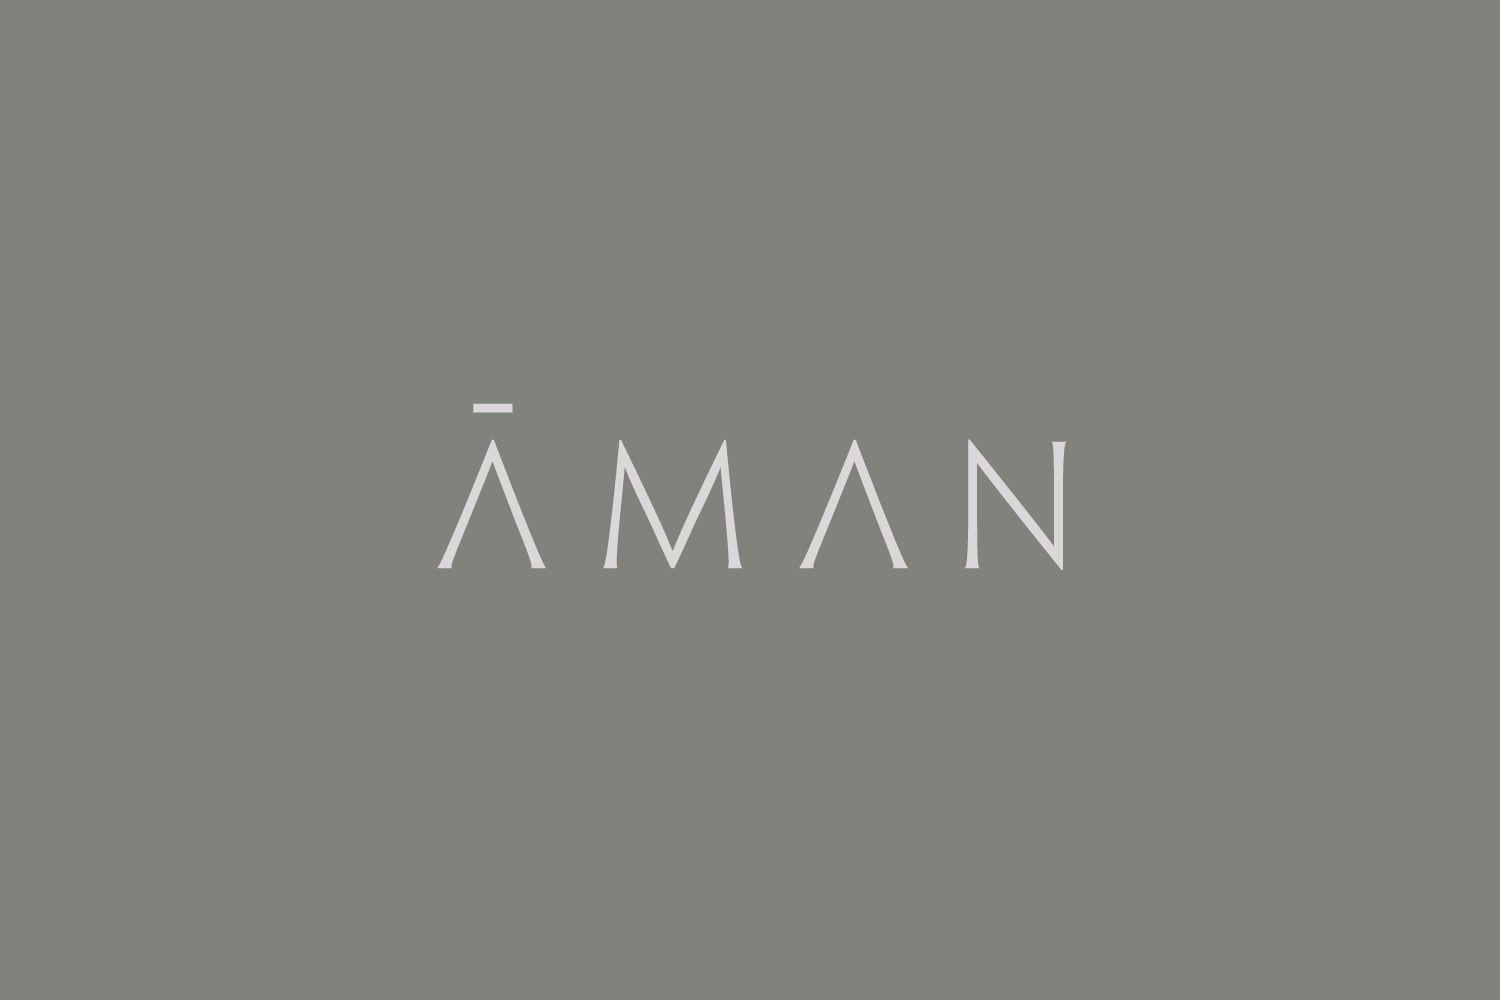 Aman Logo - New Brand Identity for Aman by Construct — BP&O